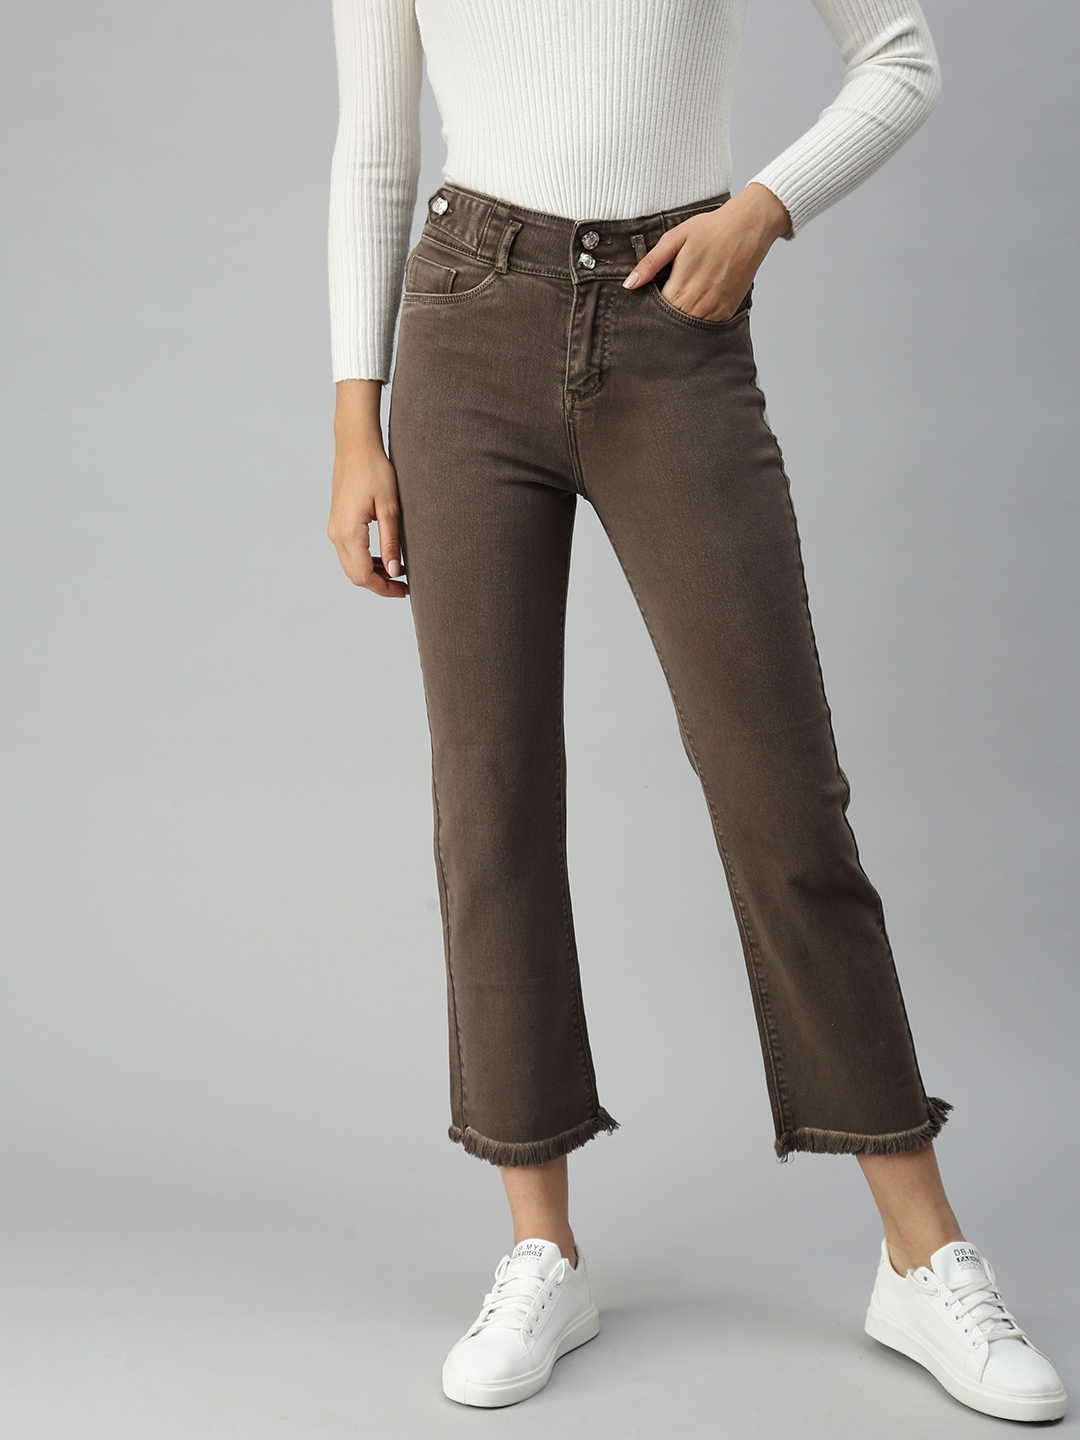 Women's Brown Others Solid Jeans